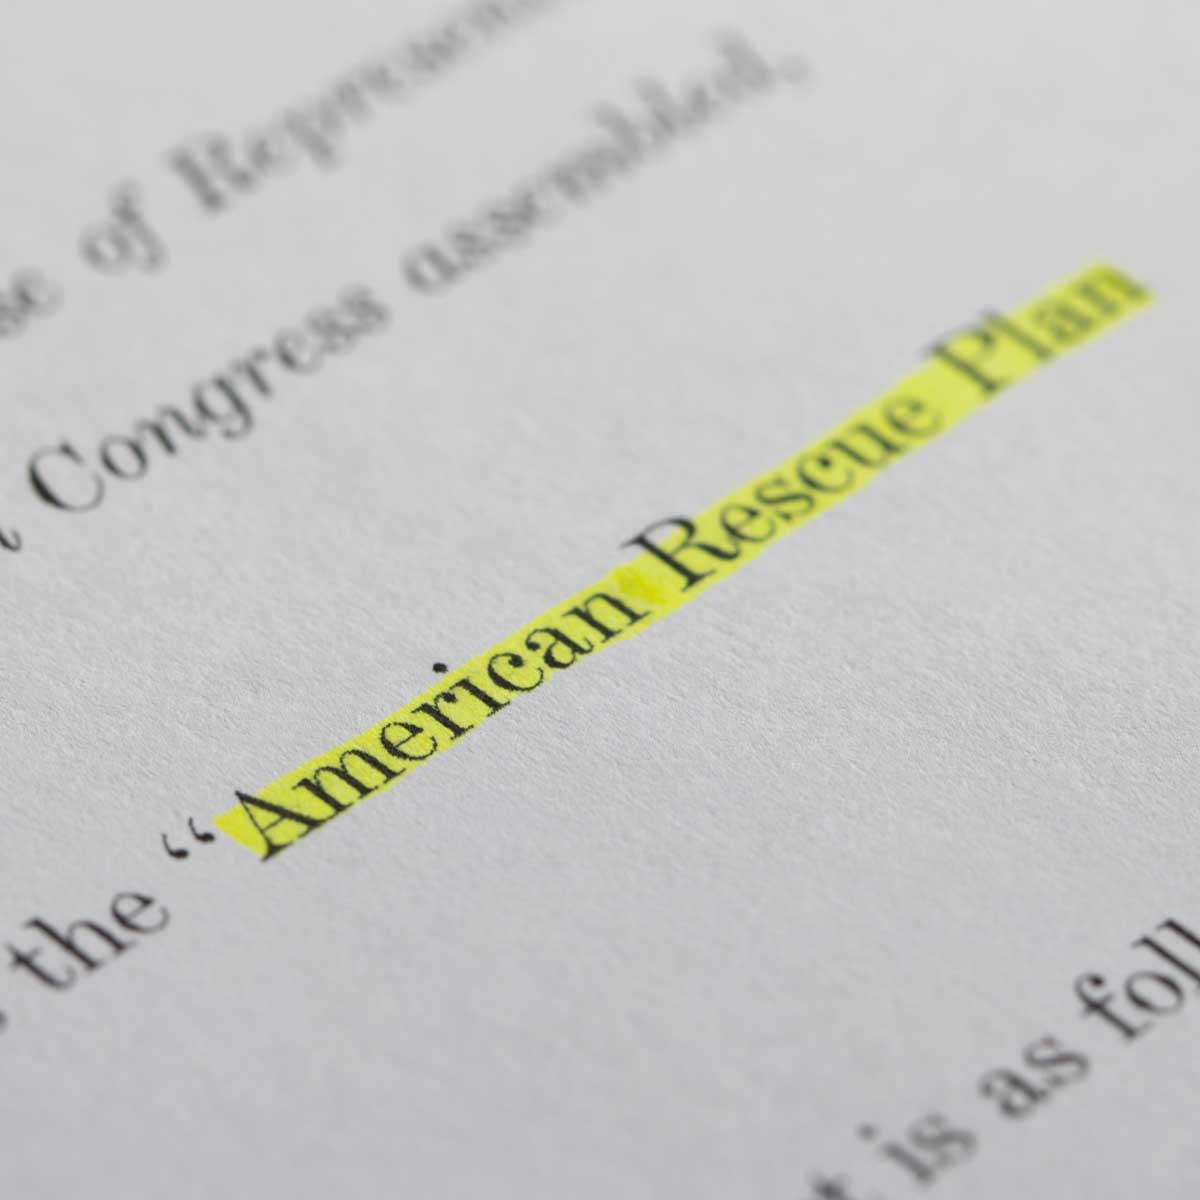 Closeup of the documents of the American Rescue Plan Act of 2021, an economic stimulus package proposed to speed up the recovery from the economic and health effects of the pandemic and the recession.